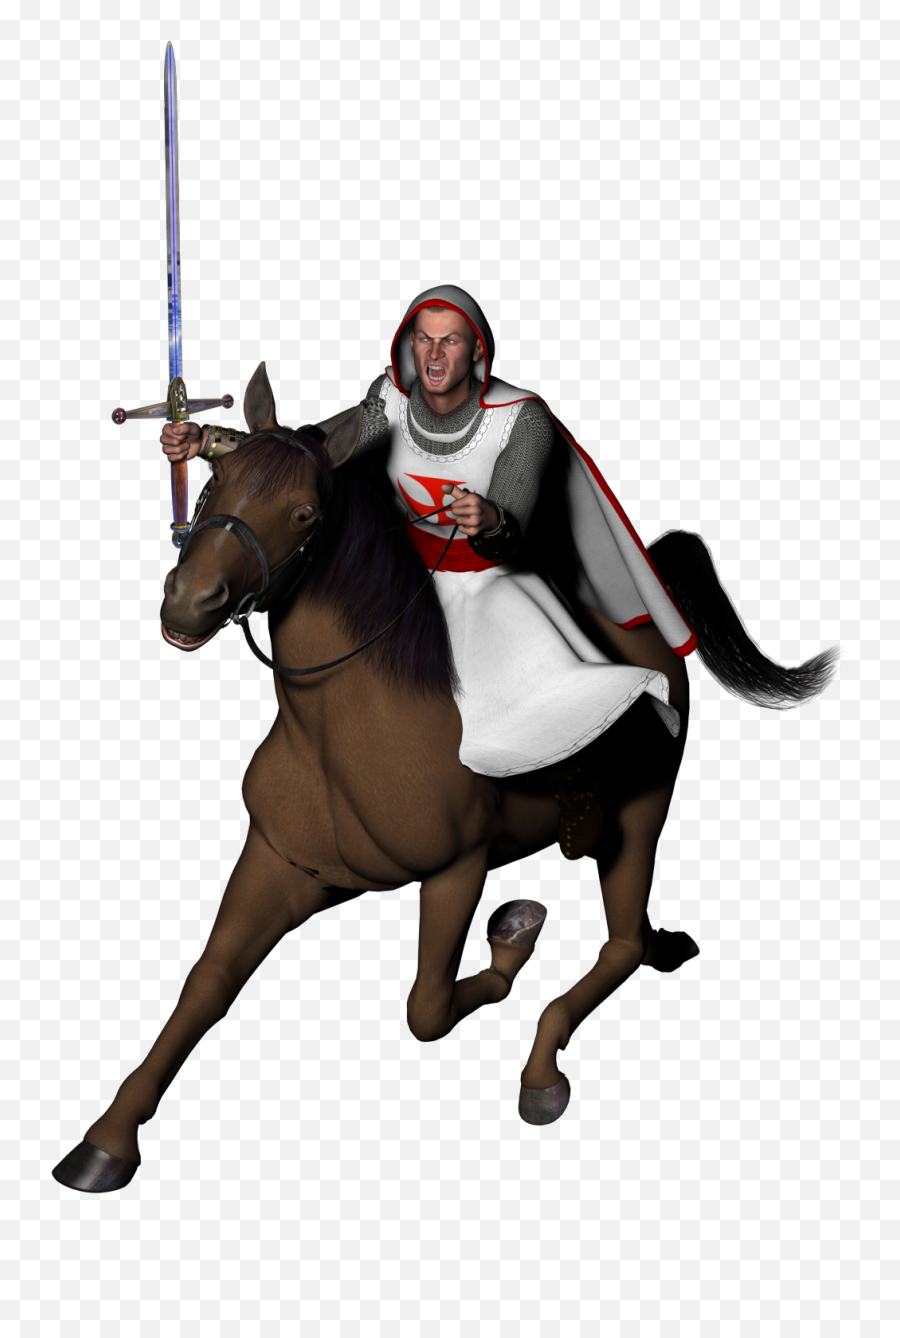 Download Medieval Png Image For Free - Knight On A Horse Transparent,Medieval Png